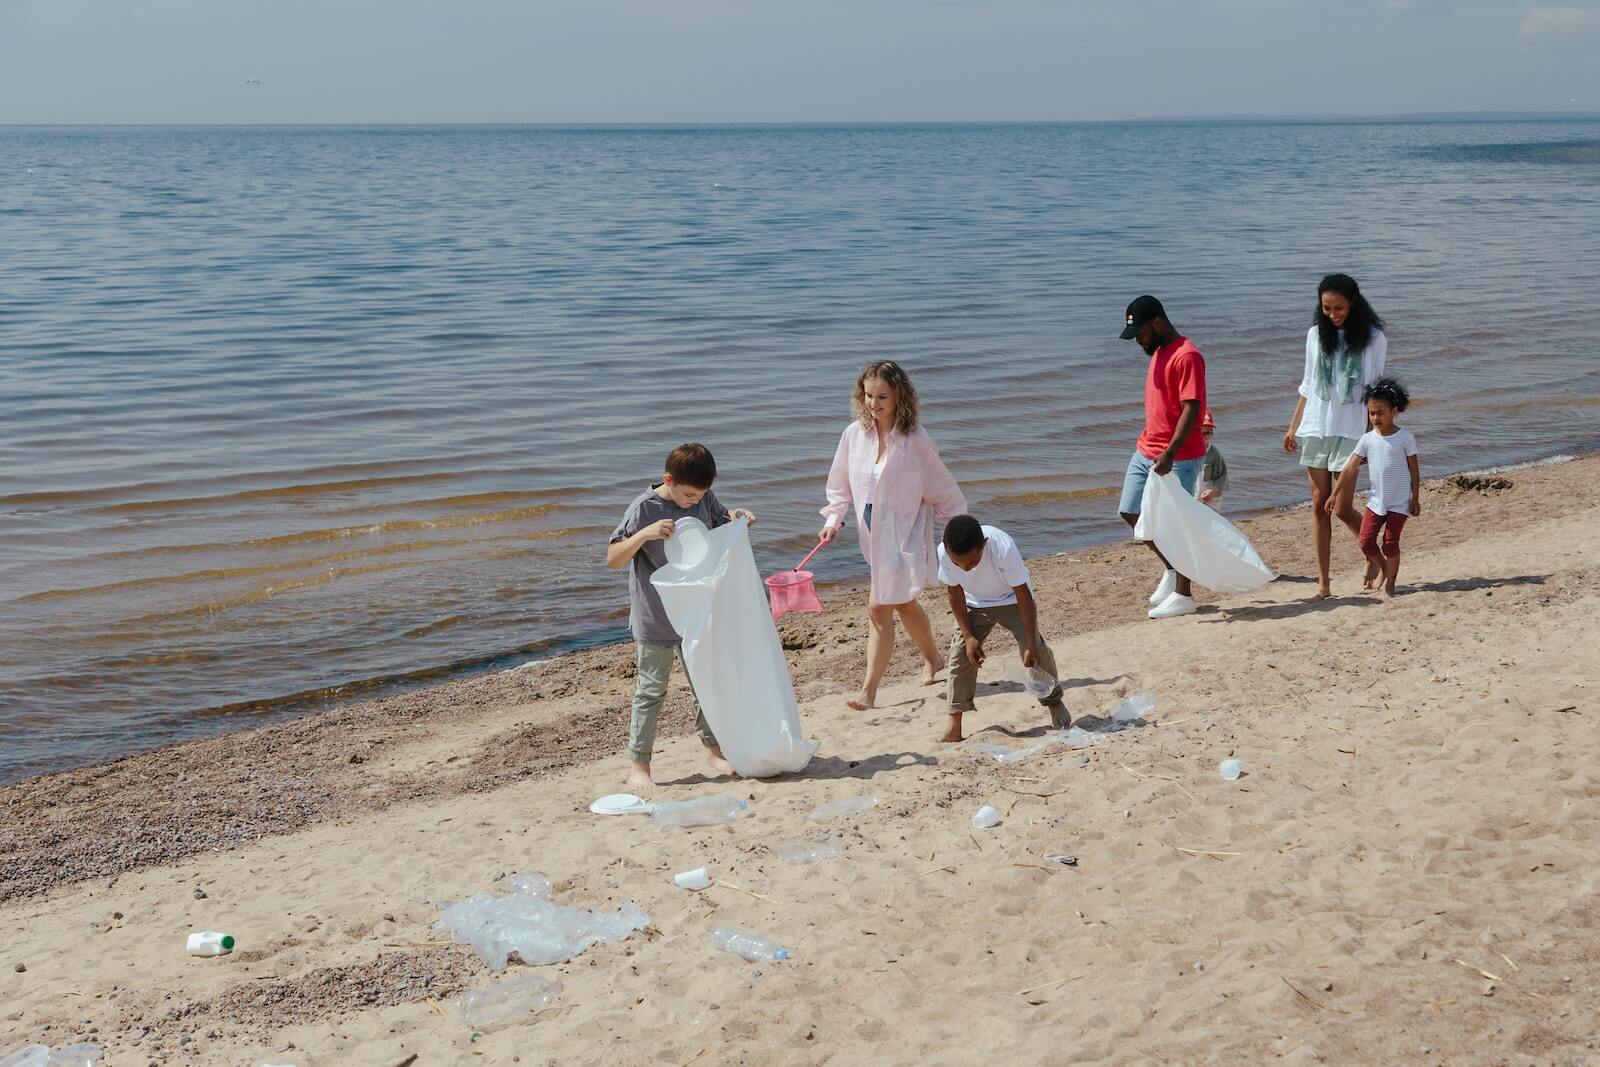 Children at the beach cleaning litter